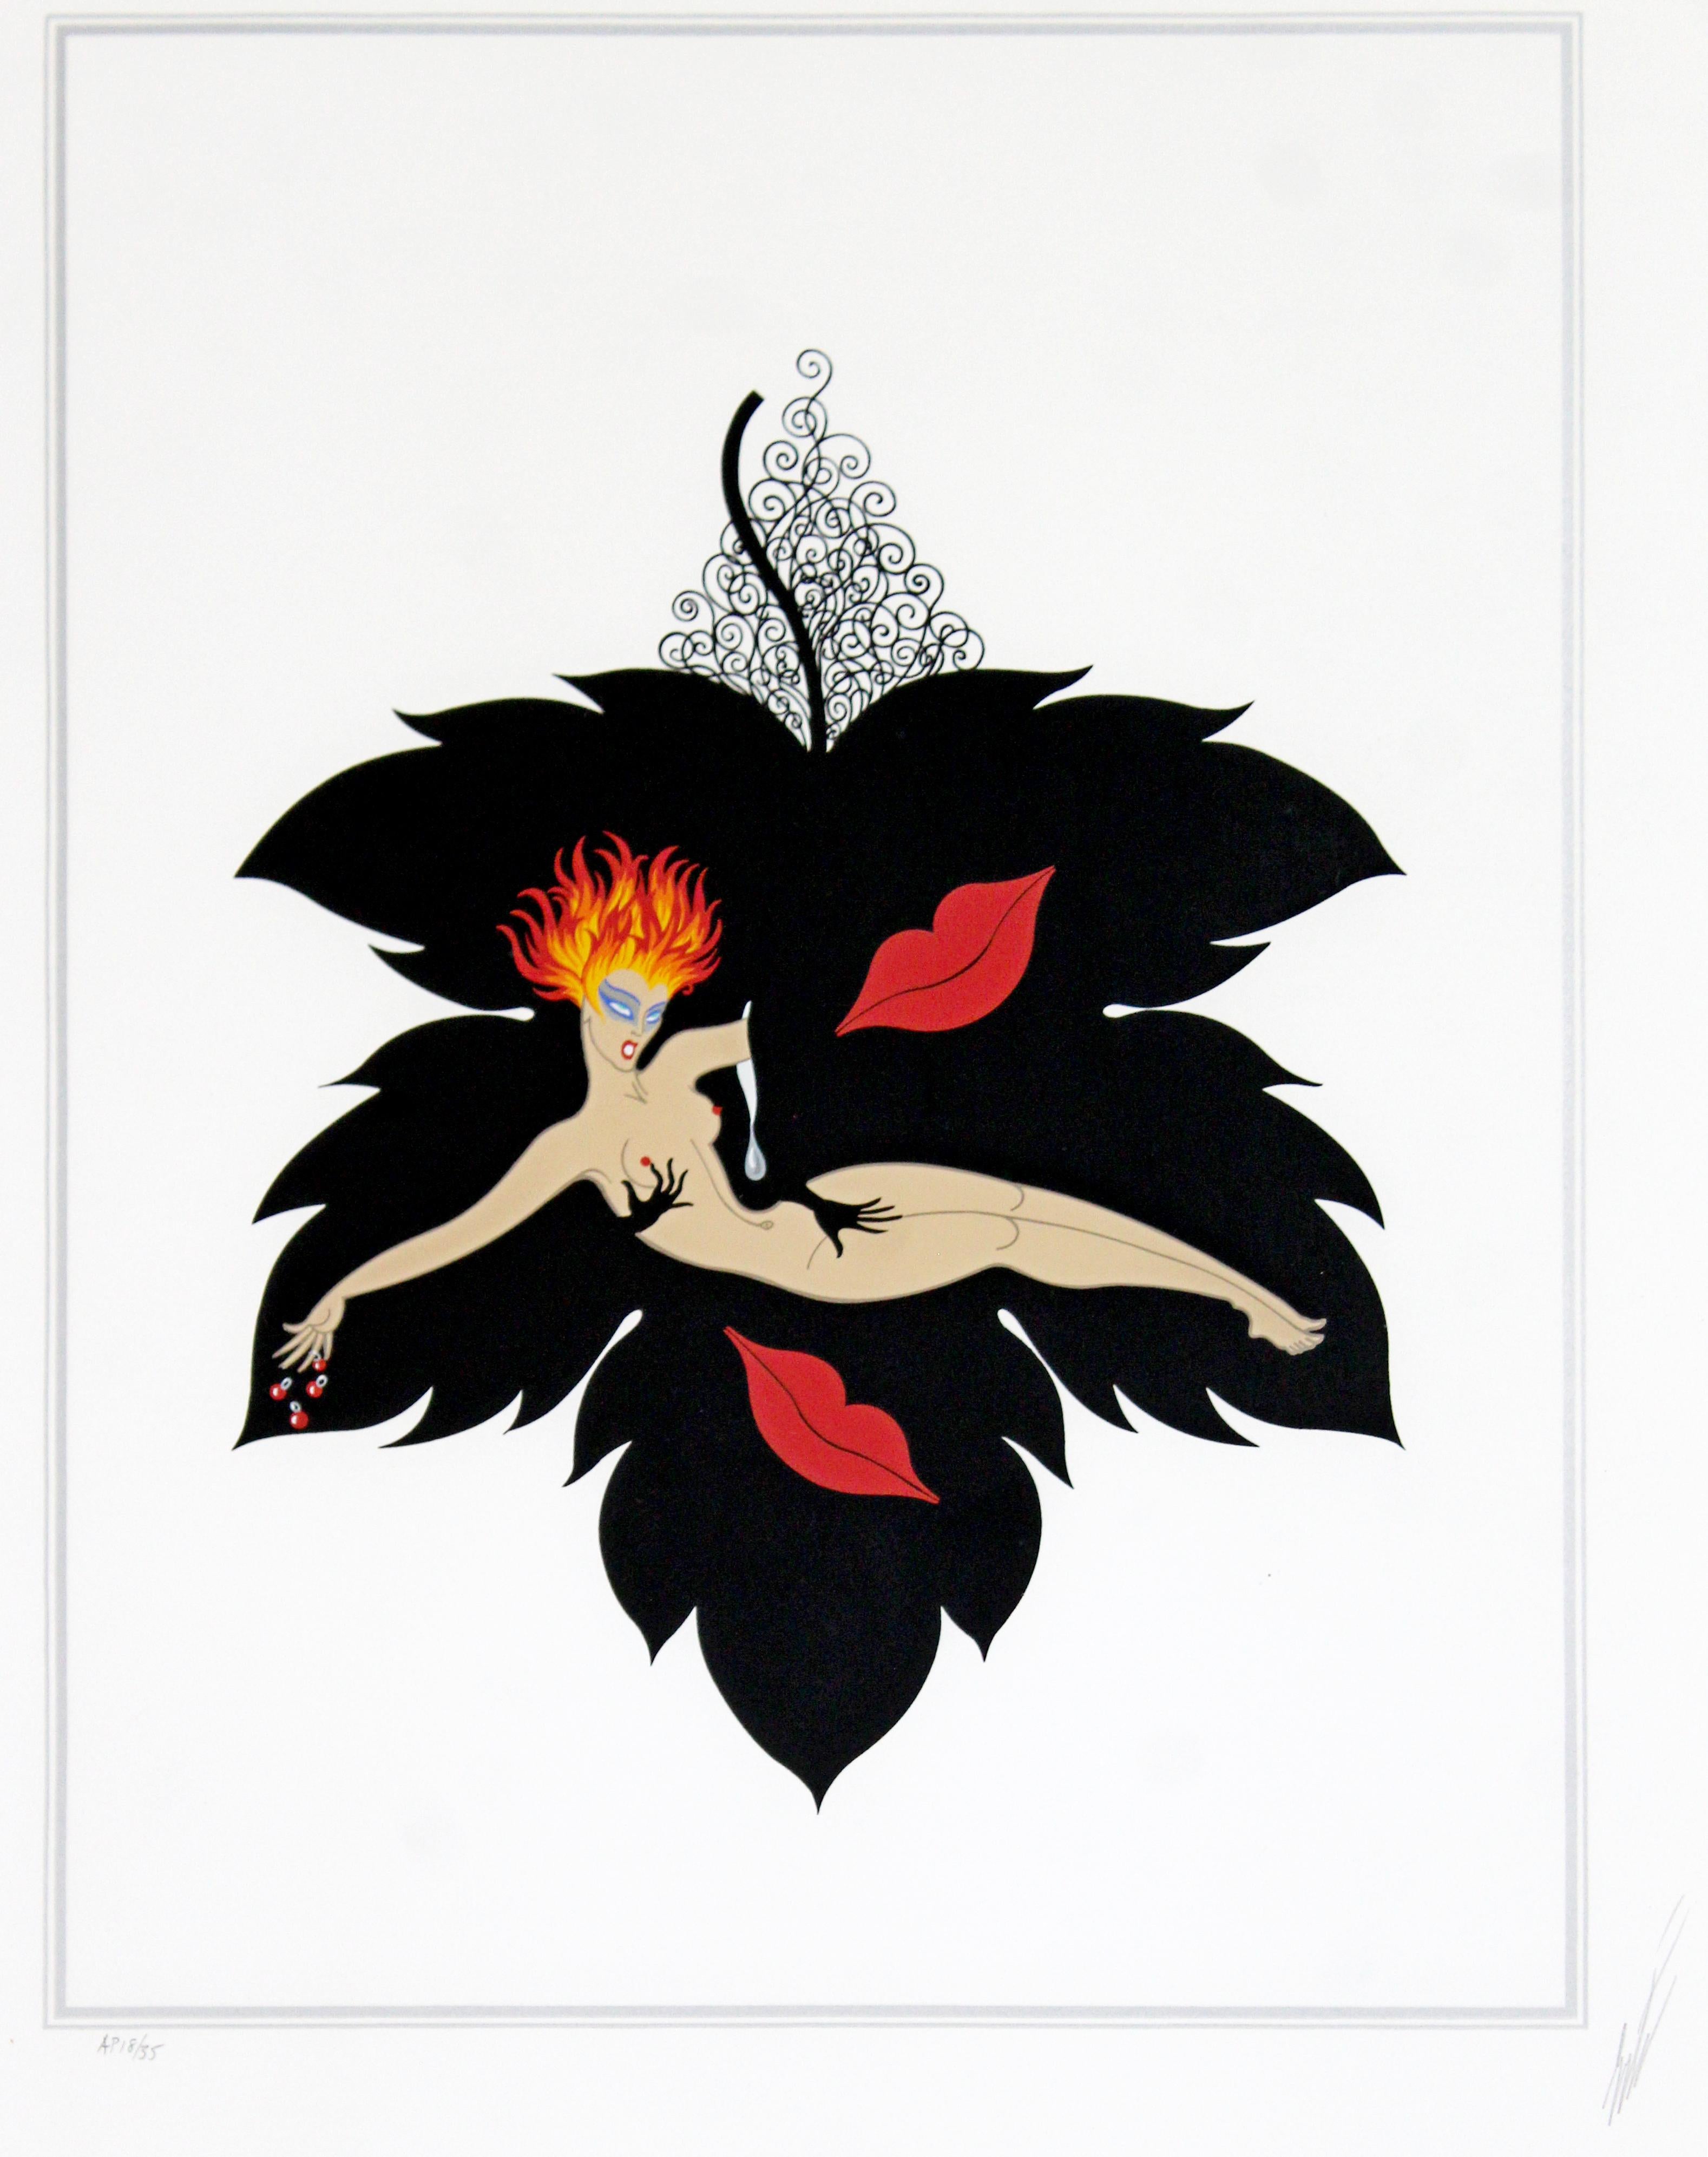 For your consideration is a framed, rare serigraph by Erte, aka Romain de Tirtoff, titled, 